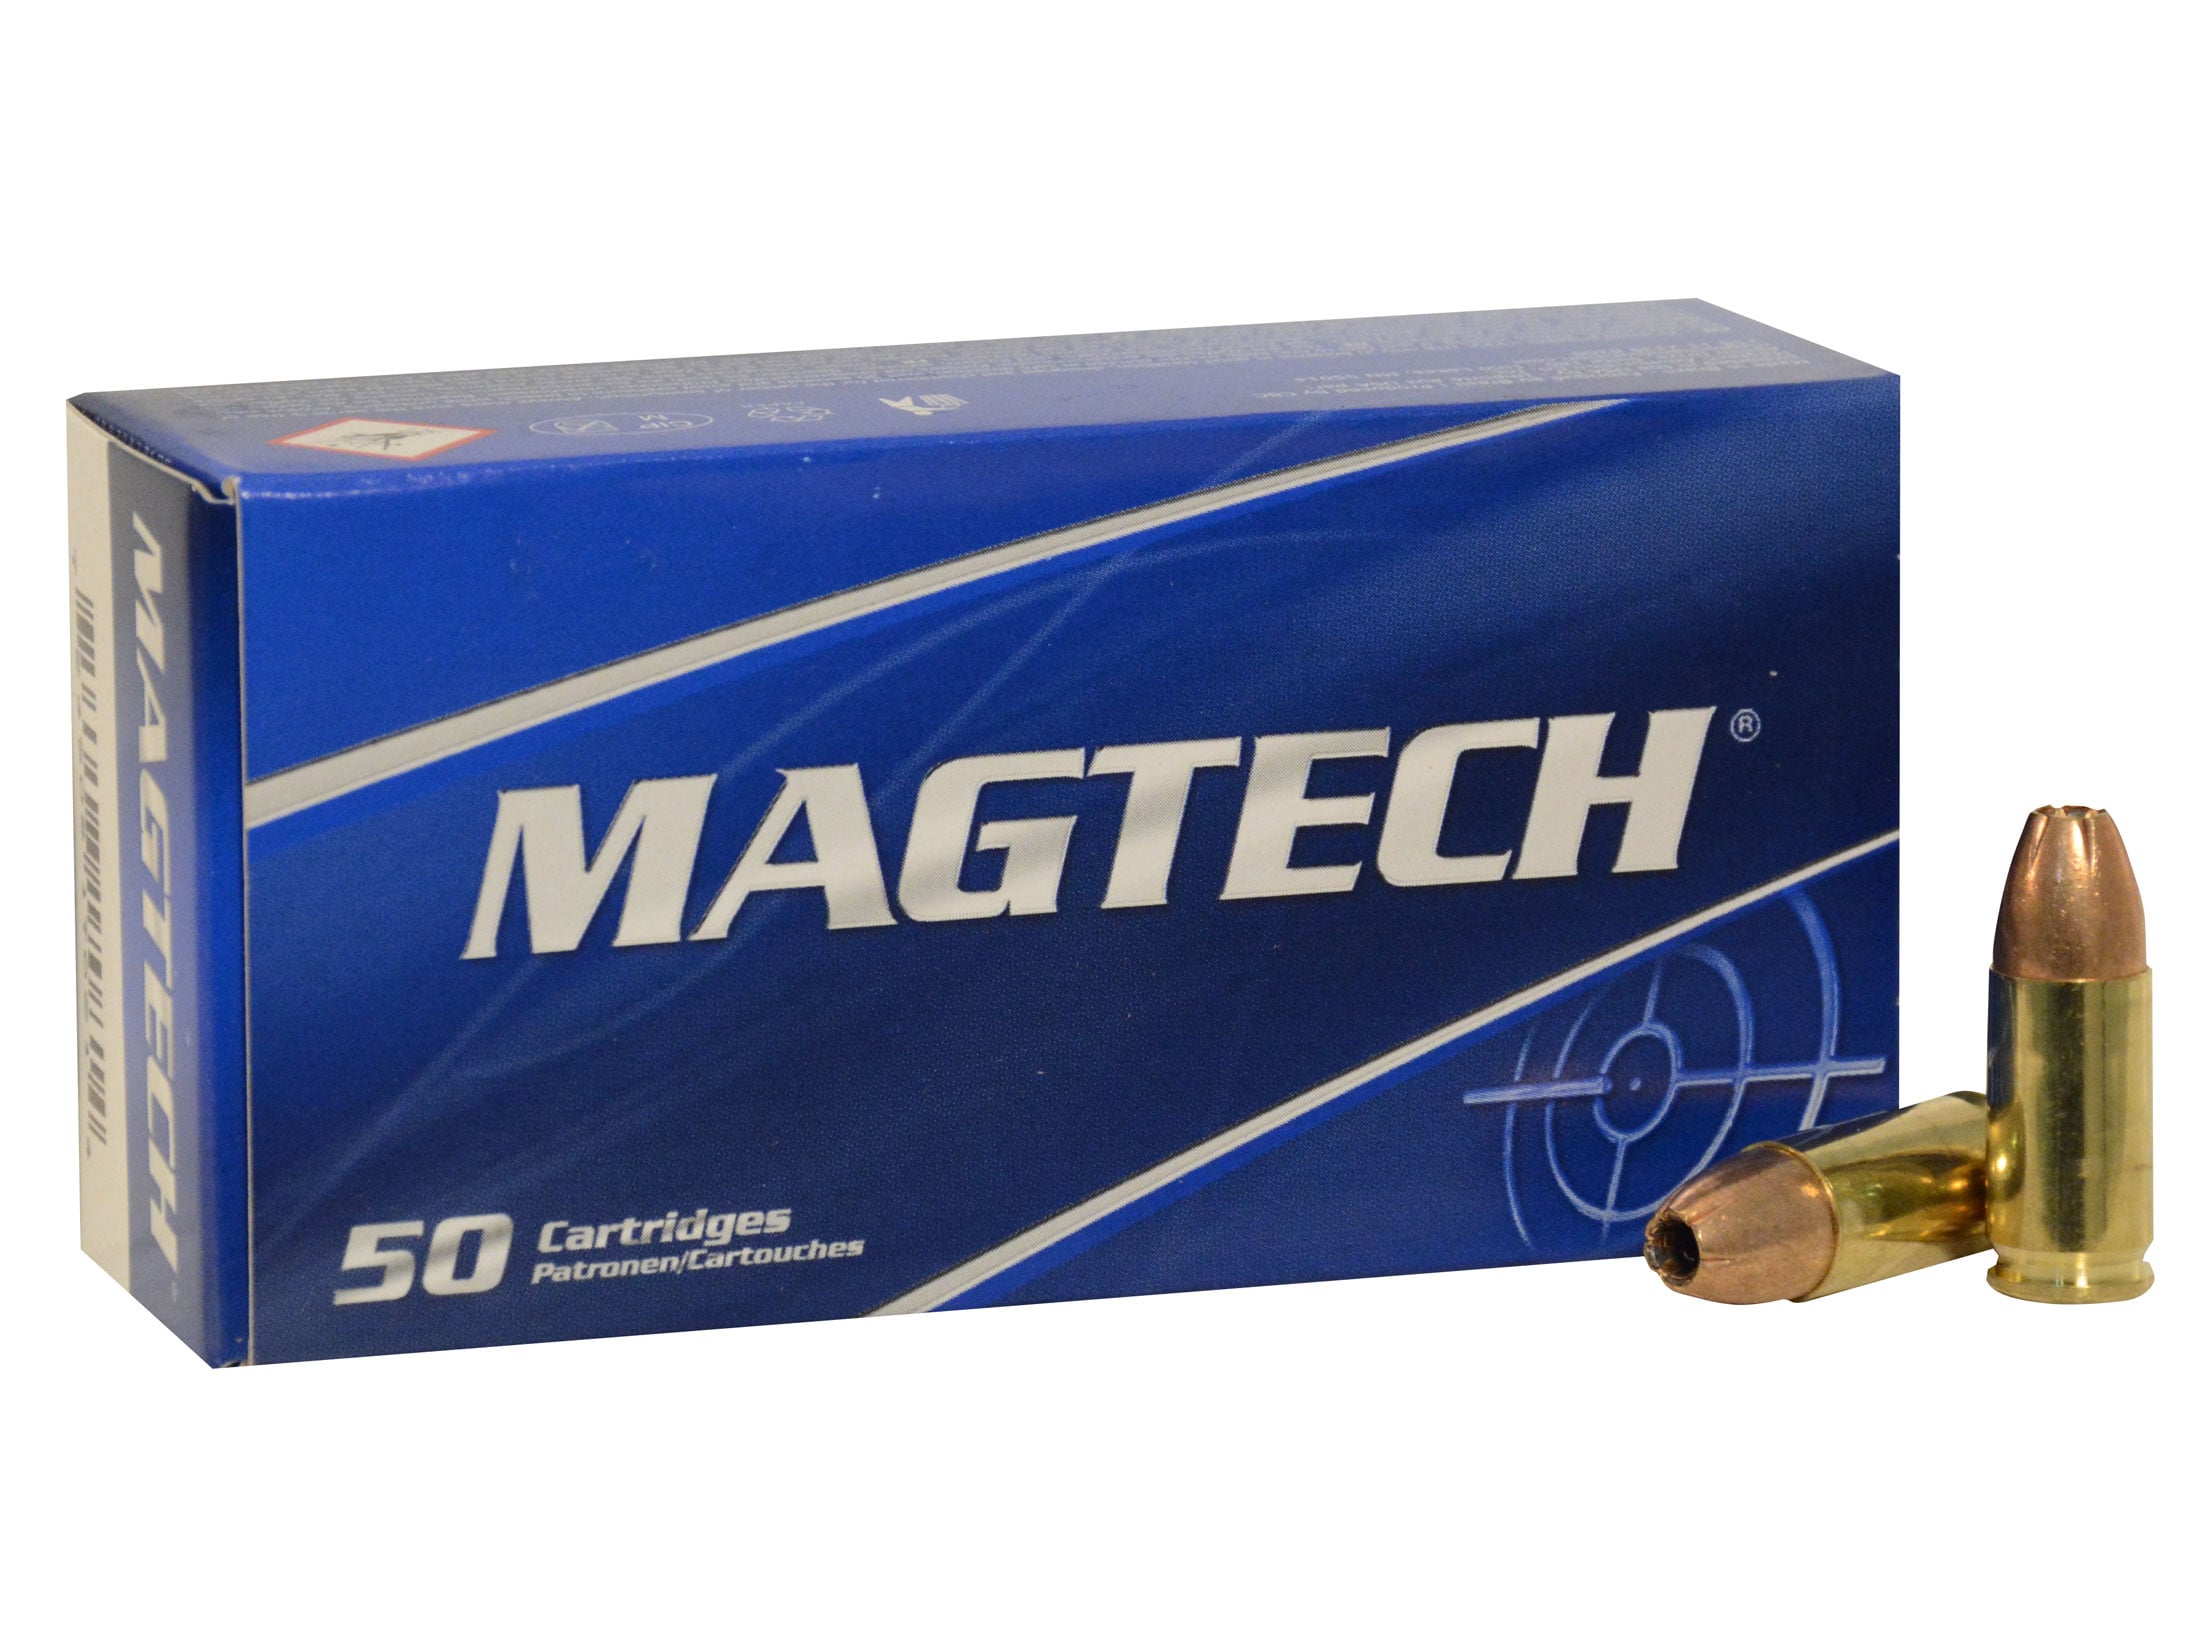 Magtech Ammo 9mm Luger +P+ 115 Grain Jacketed Hollow Point Box of 50.